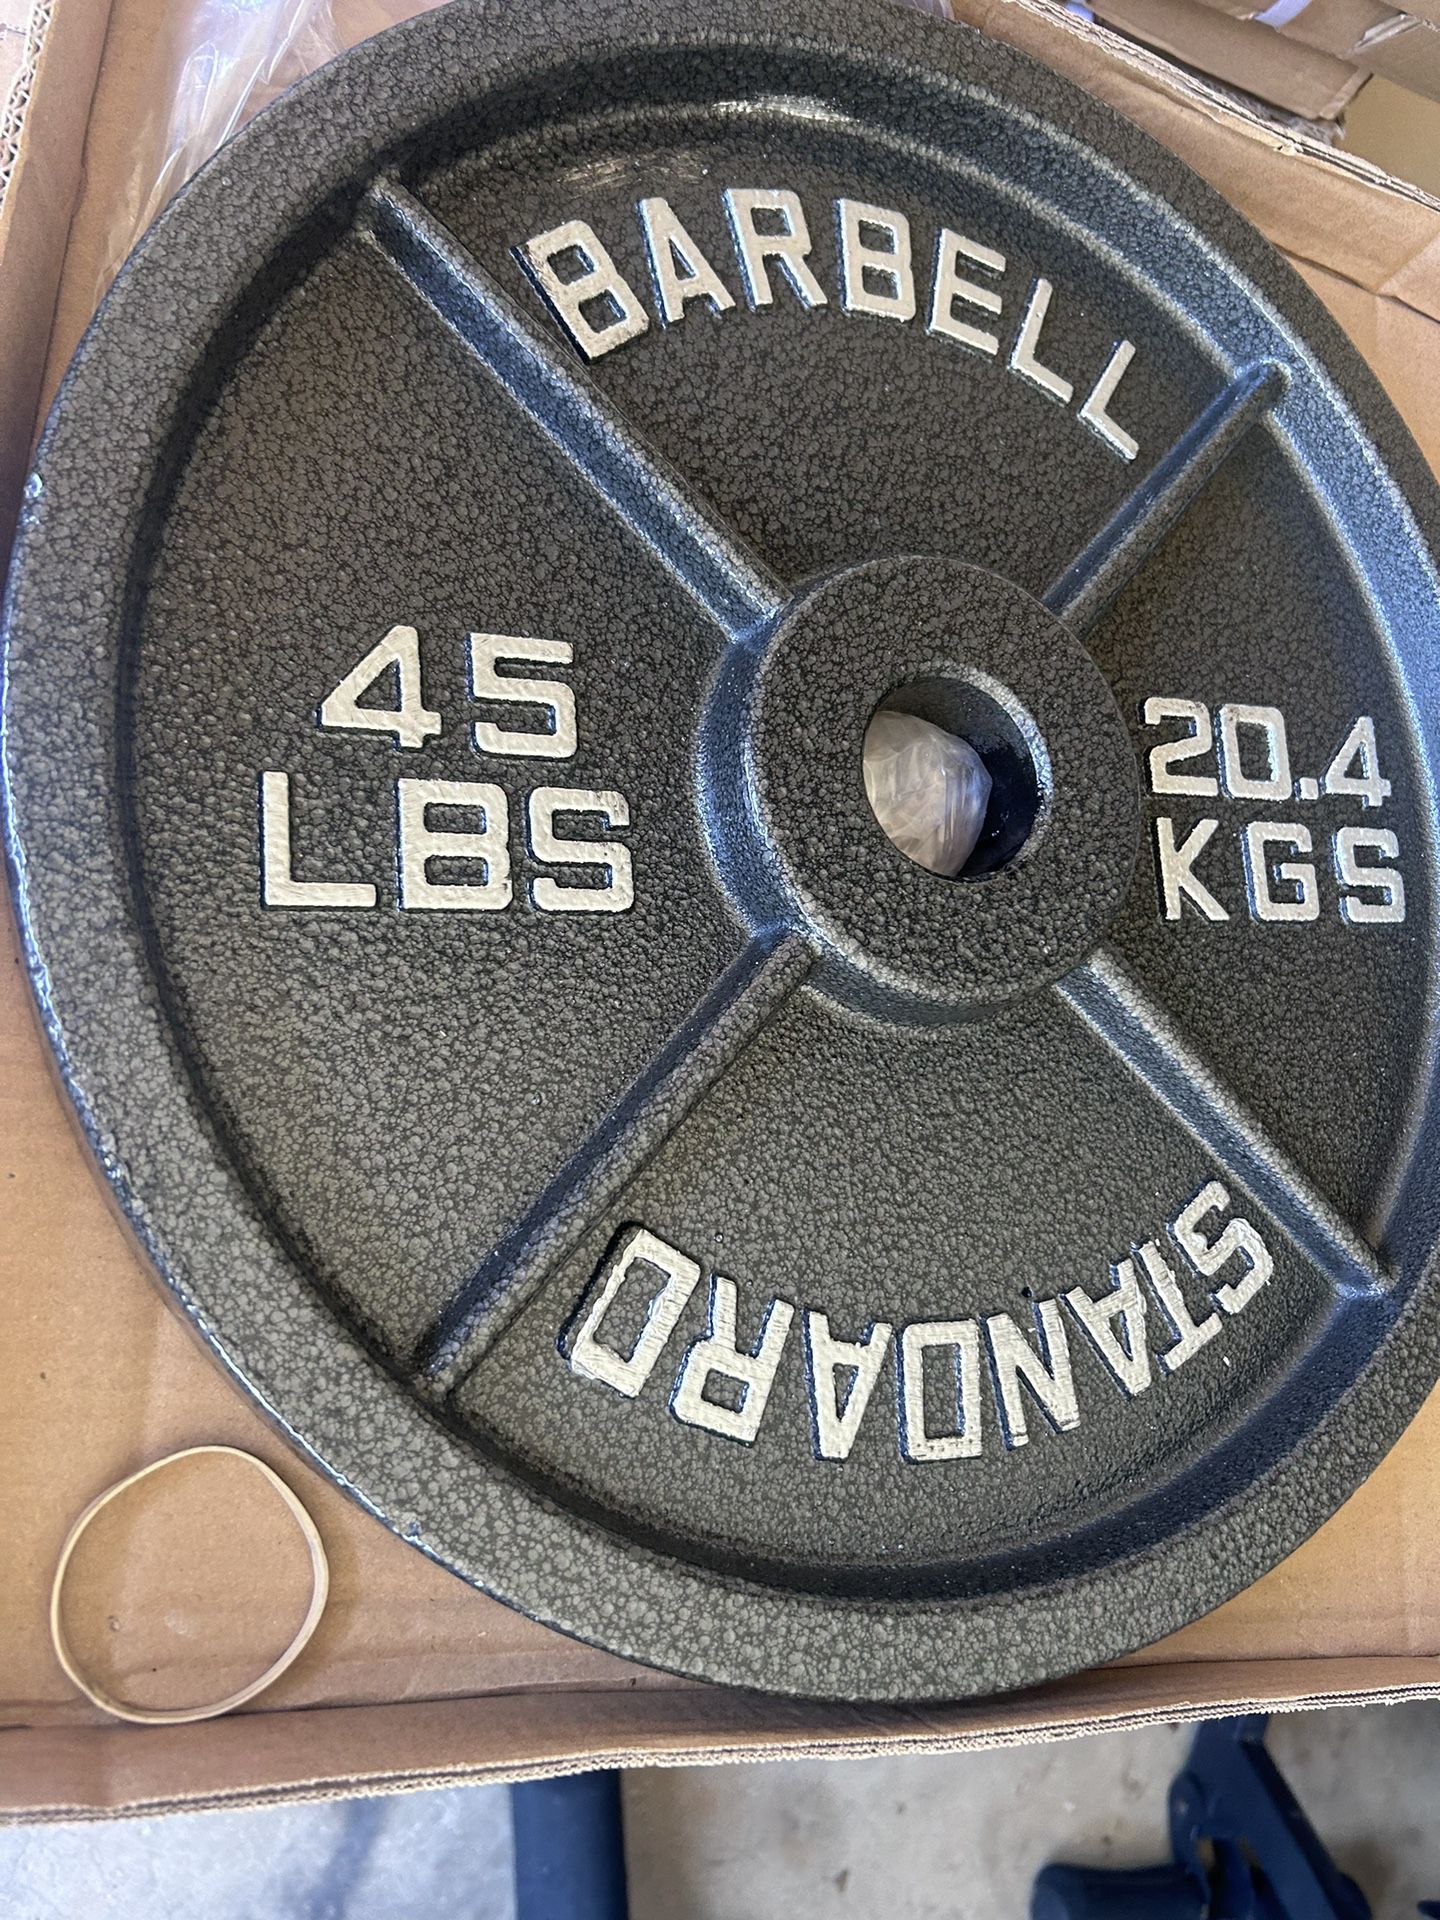 New 45 Lbs Olympic Weight (IN THE BOX)